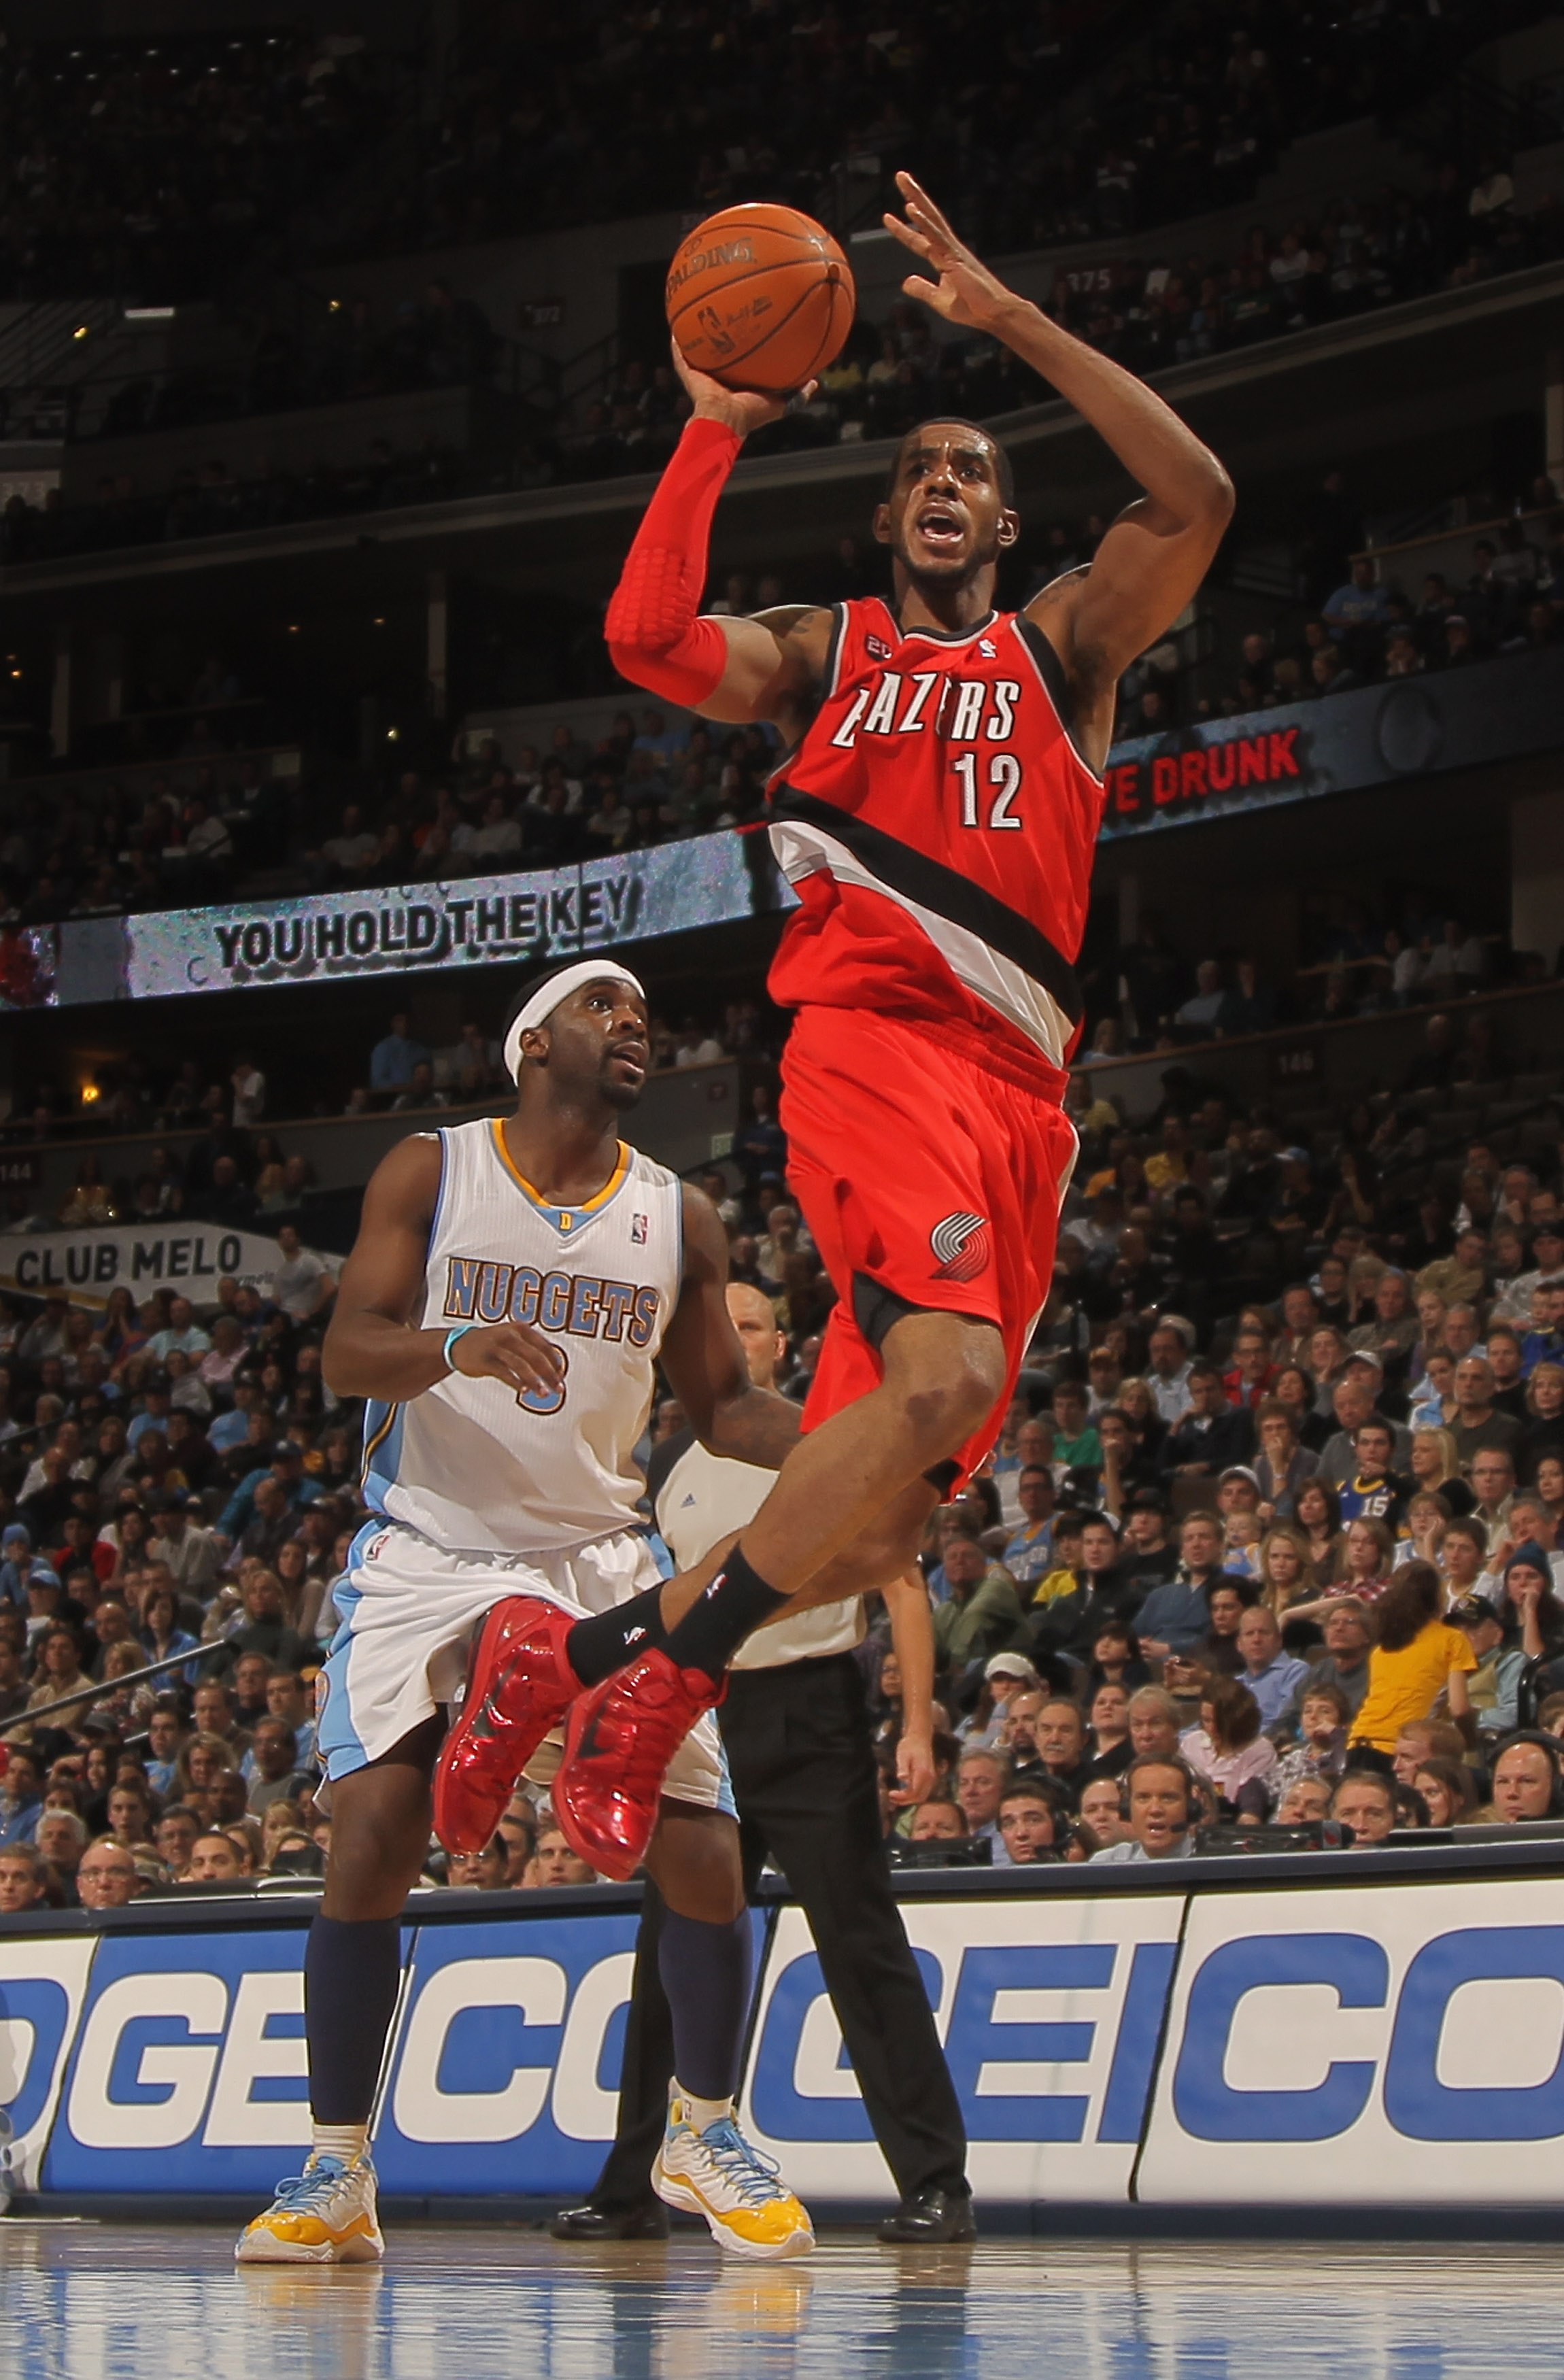 DENVER - DECEMBER 28:  LaMarcus Aldridge #12 of the Portland Trail Blazers takes a shot in front of Ty Lawson #3 of the Denver Nuggets at Pepsi Center on December 28, 2010 in Denver, Colorado. NOTE TO USER: User expressly acknowledges and agrees that, by